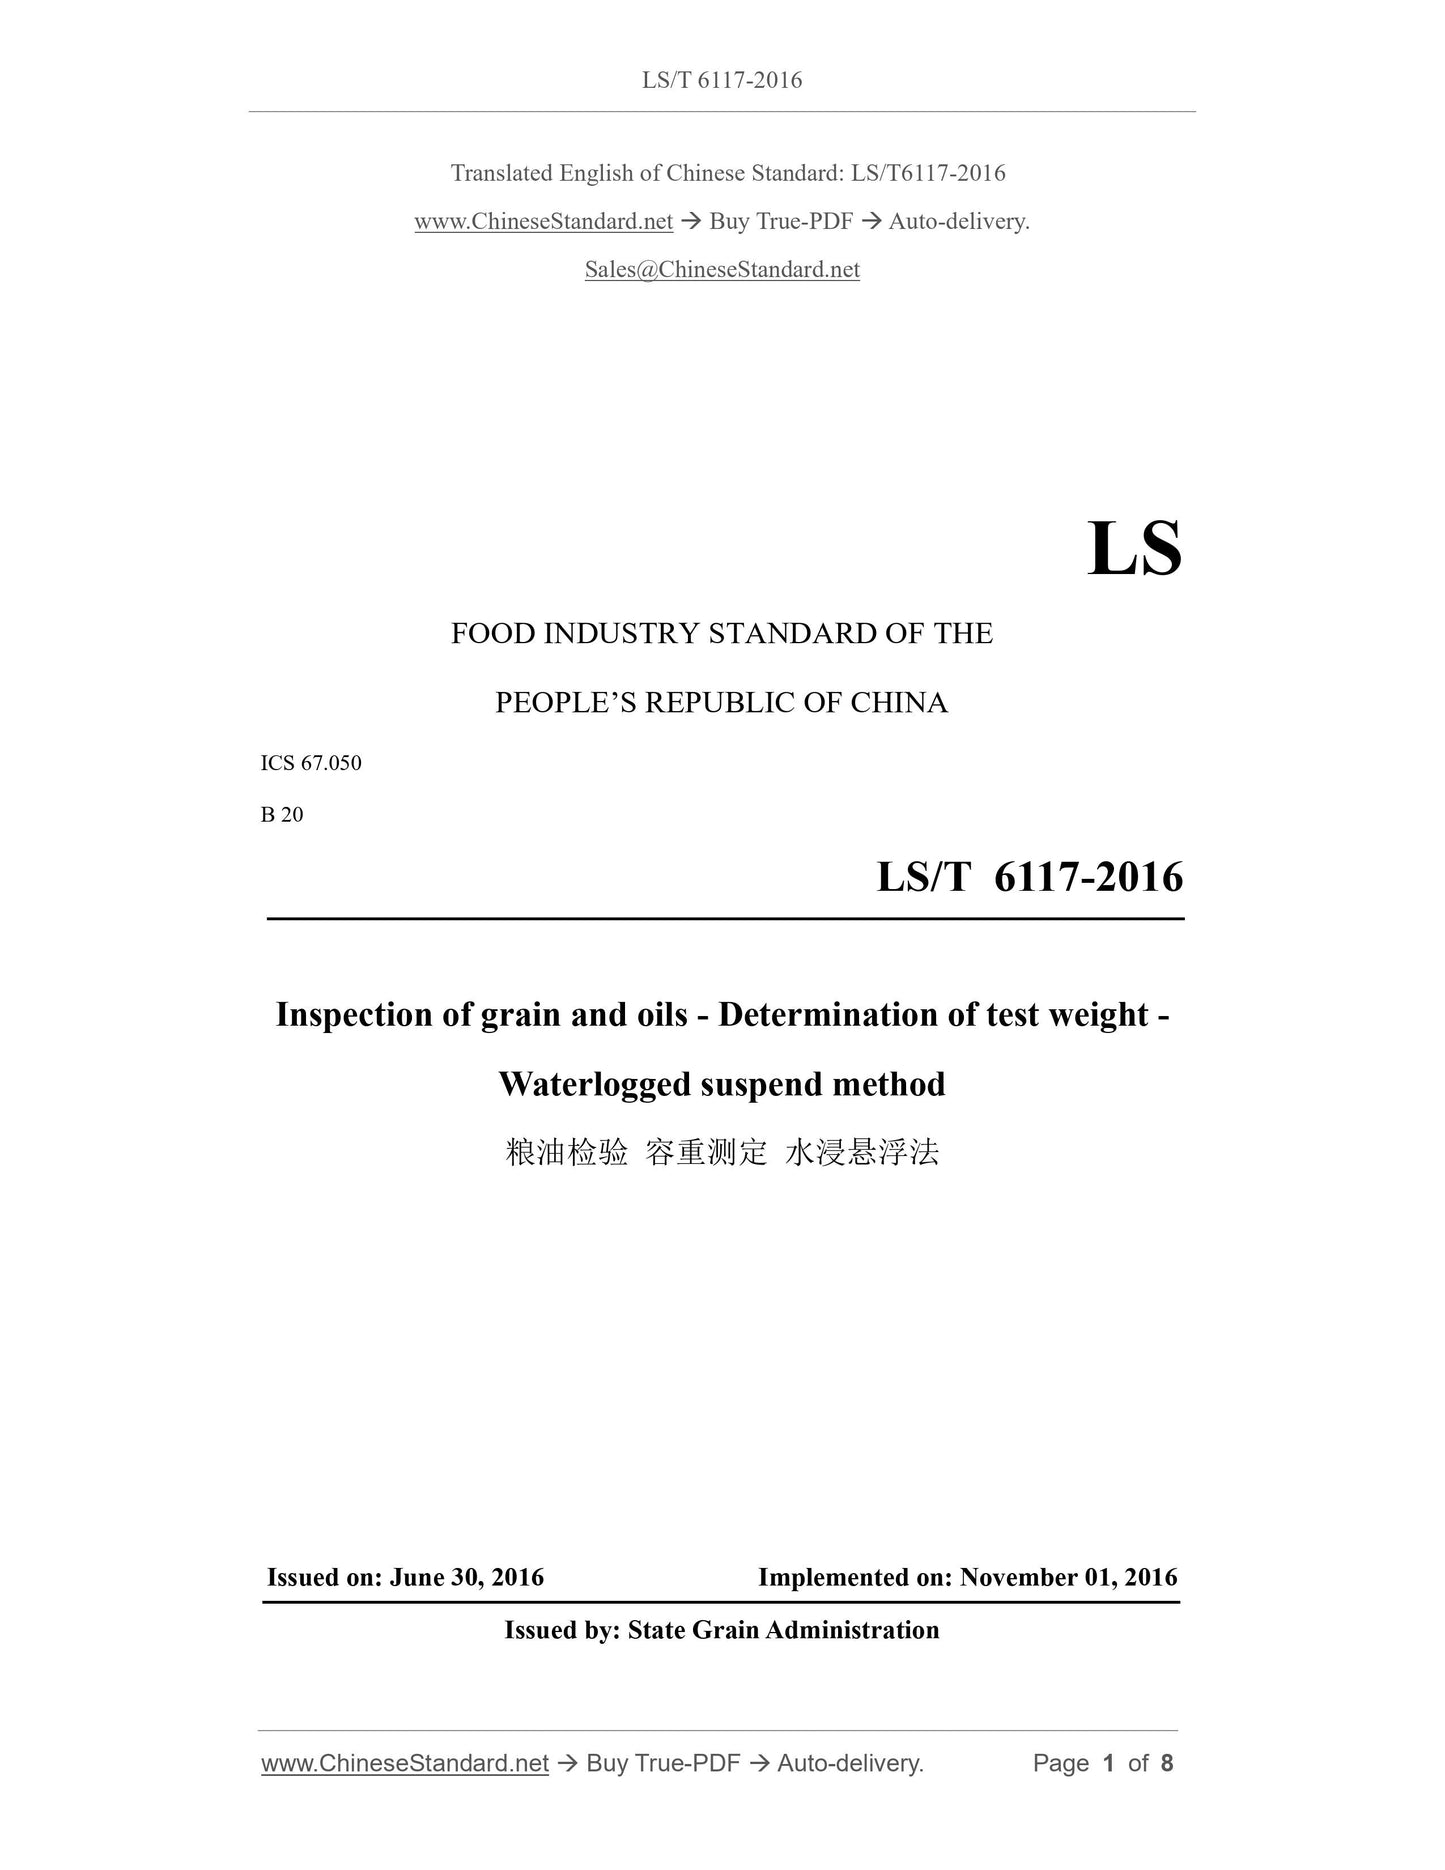 LS/T 6117-2016 Page 1